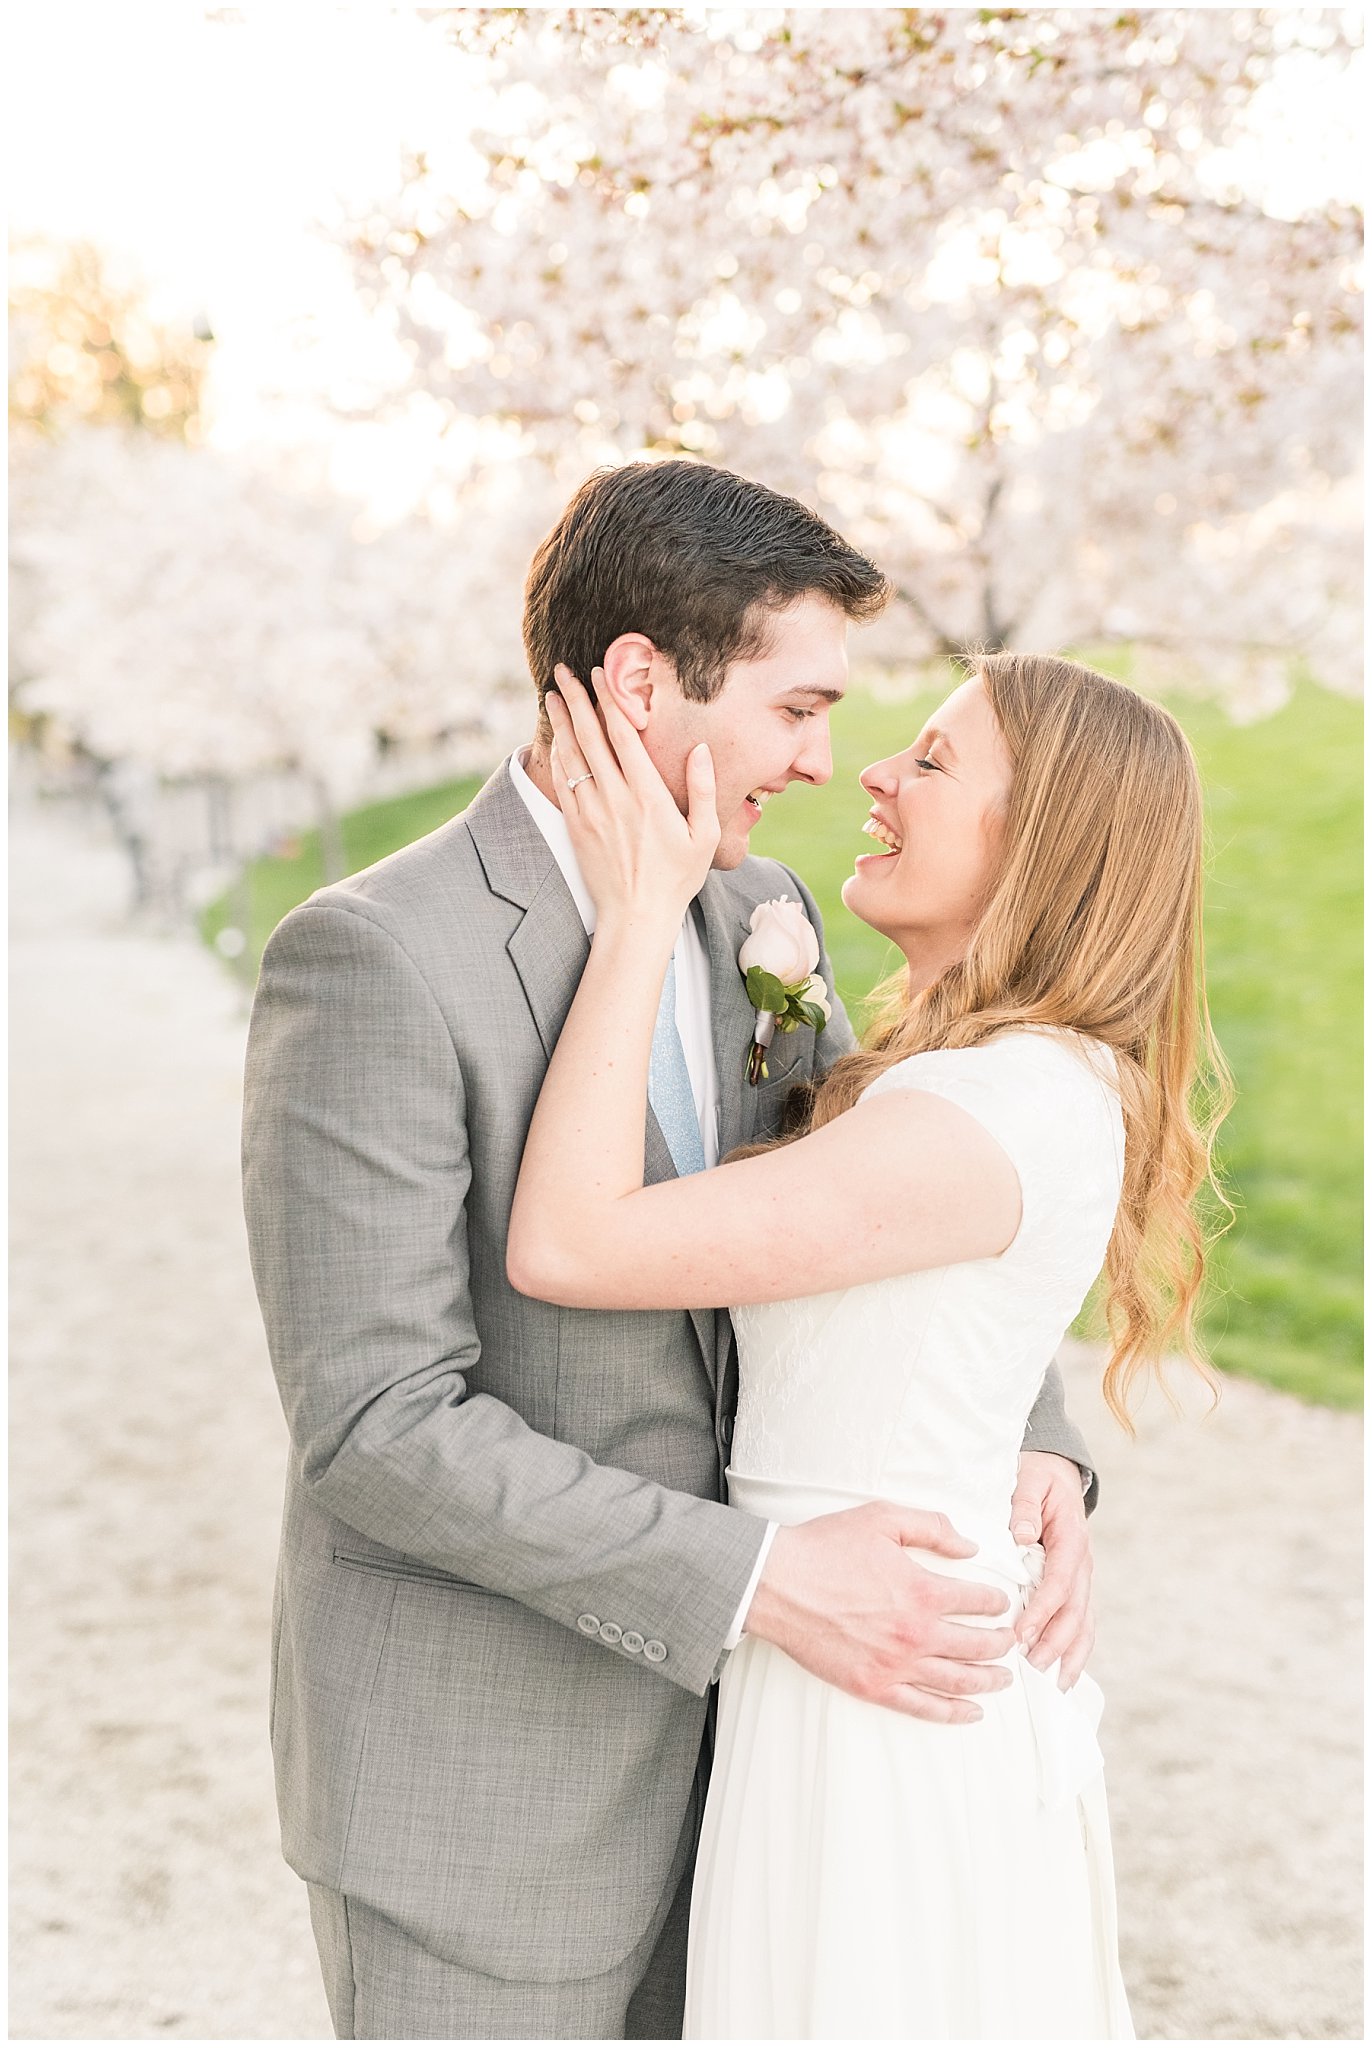 Bride with blush bouquet and groom with grey suit in the cherry blossoms | Utah State Capitol Blossoms Formal Session | Salt Lake Wedding Photographers | Jessie and Dallin Photography